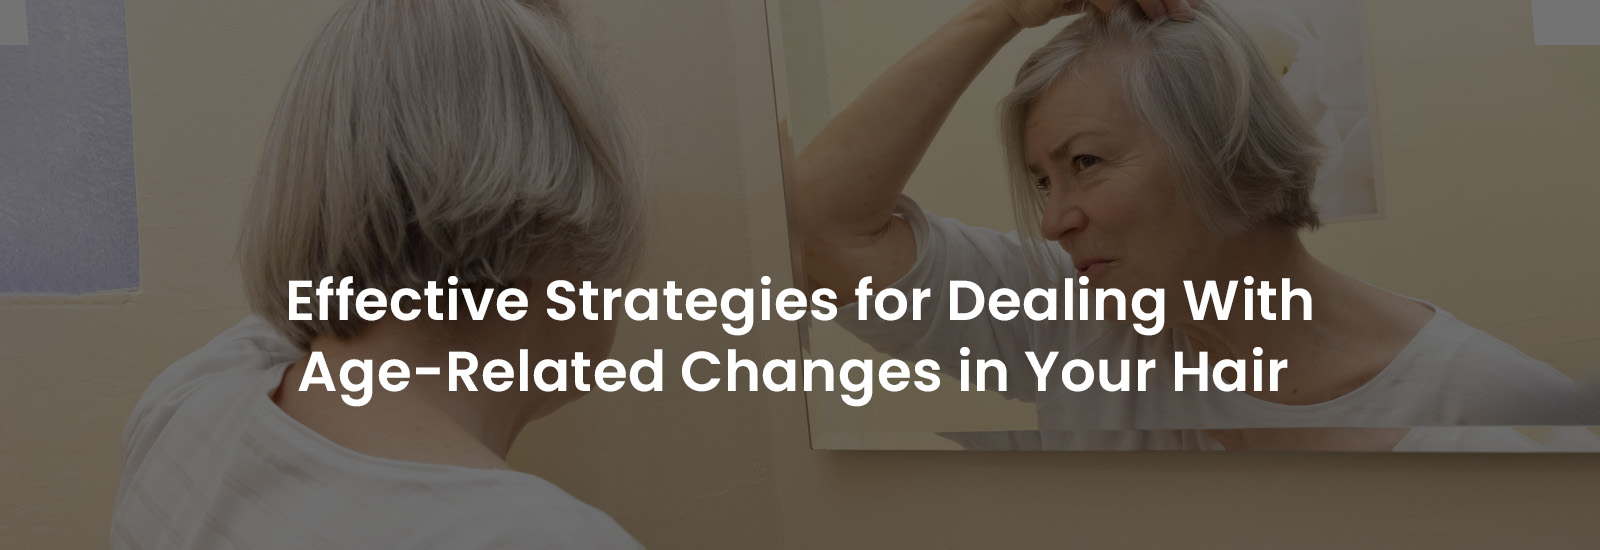 Strategies for Dealing with Age-Related Changes in Your Hair | Banner Image